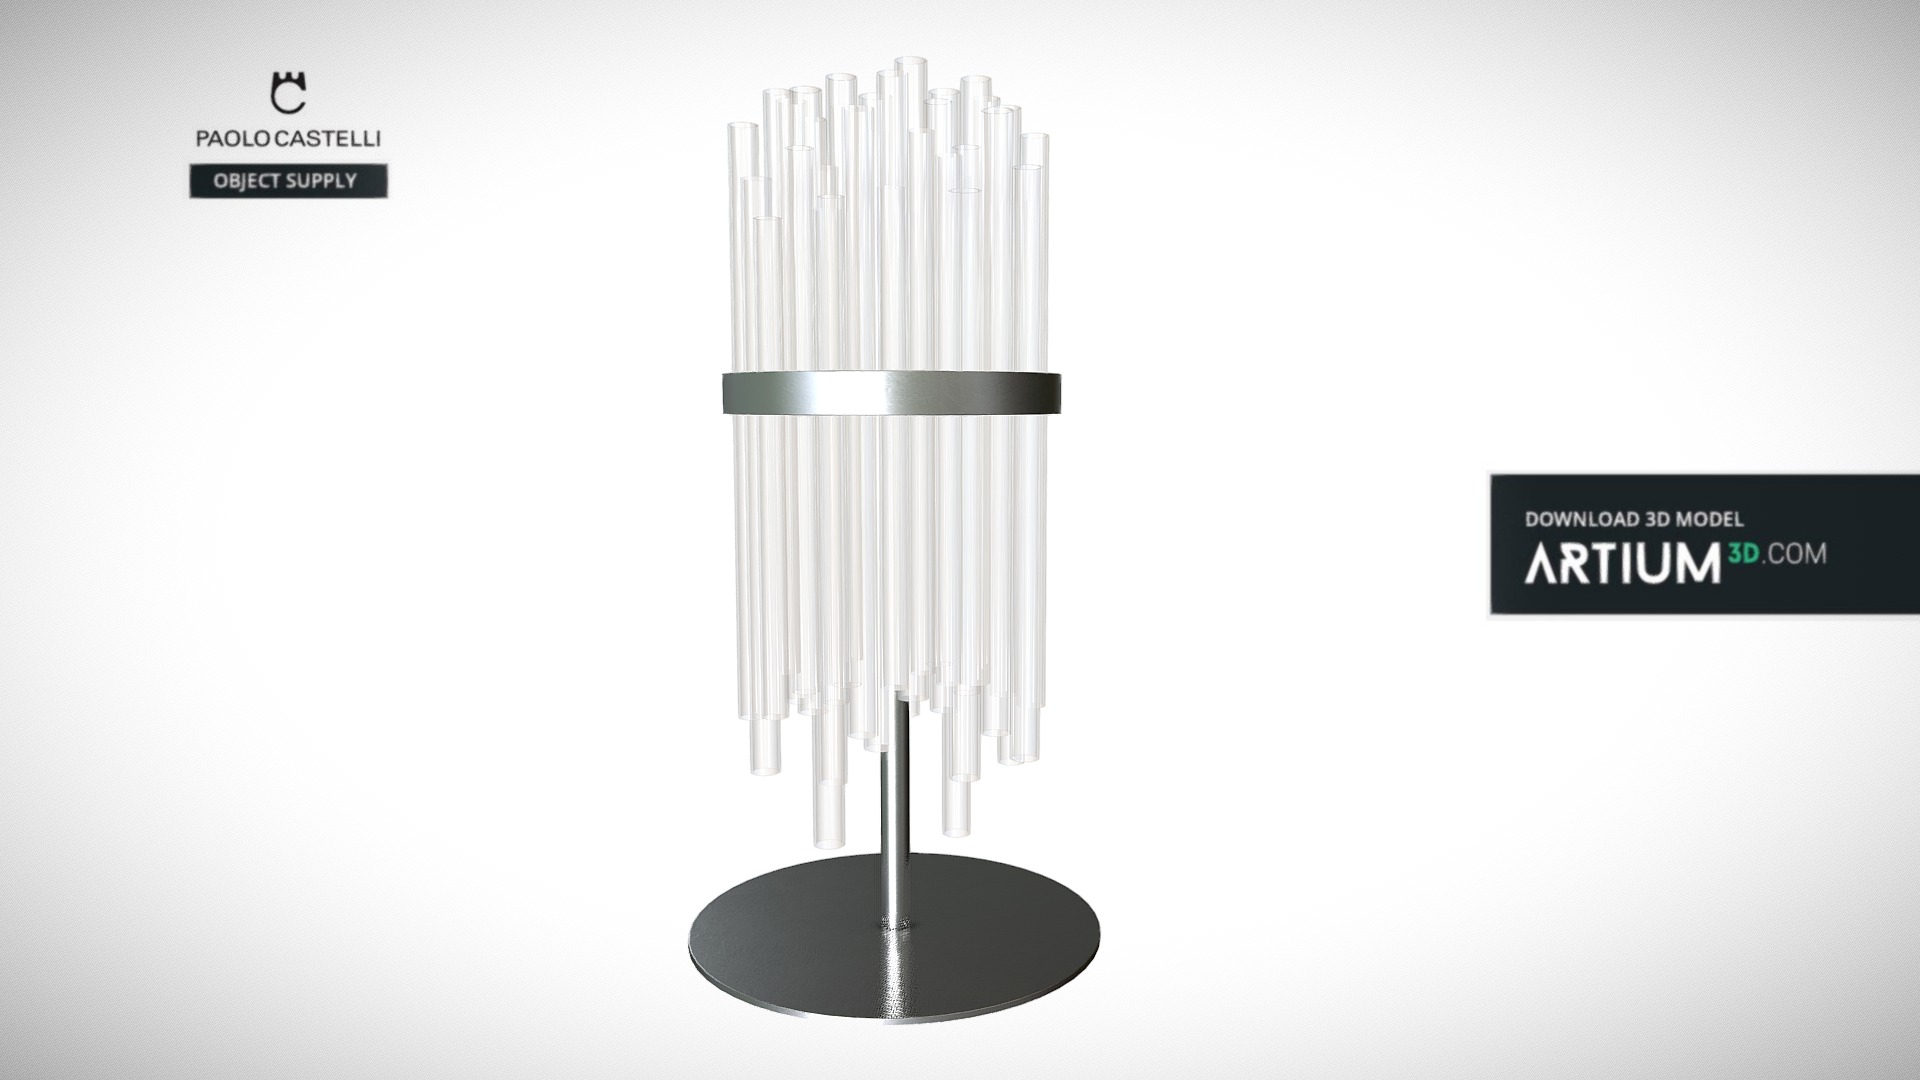 3D model My Lamp Table Suspension R100 – Paolo Castelli - This is a 3D model of the My Lamp Table Suspension R100 - Paolo Castelli. The 3D model is about a tall glass lamp.